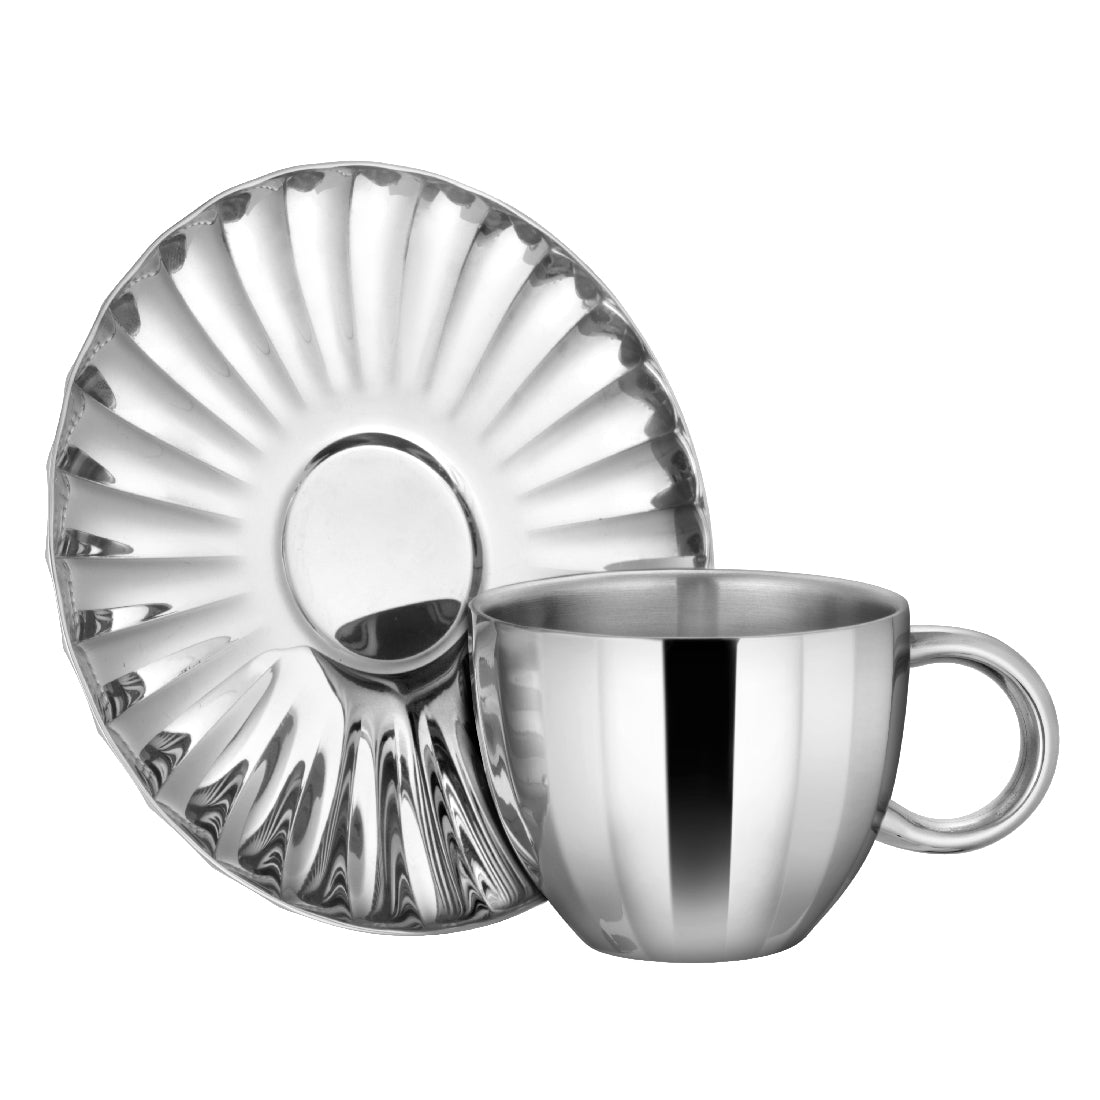 Stainless Steel 4 PCS Double Wall Cup and Saucer Espresso Step Design